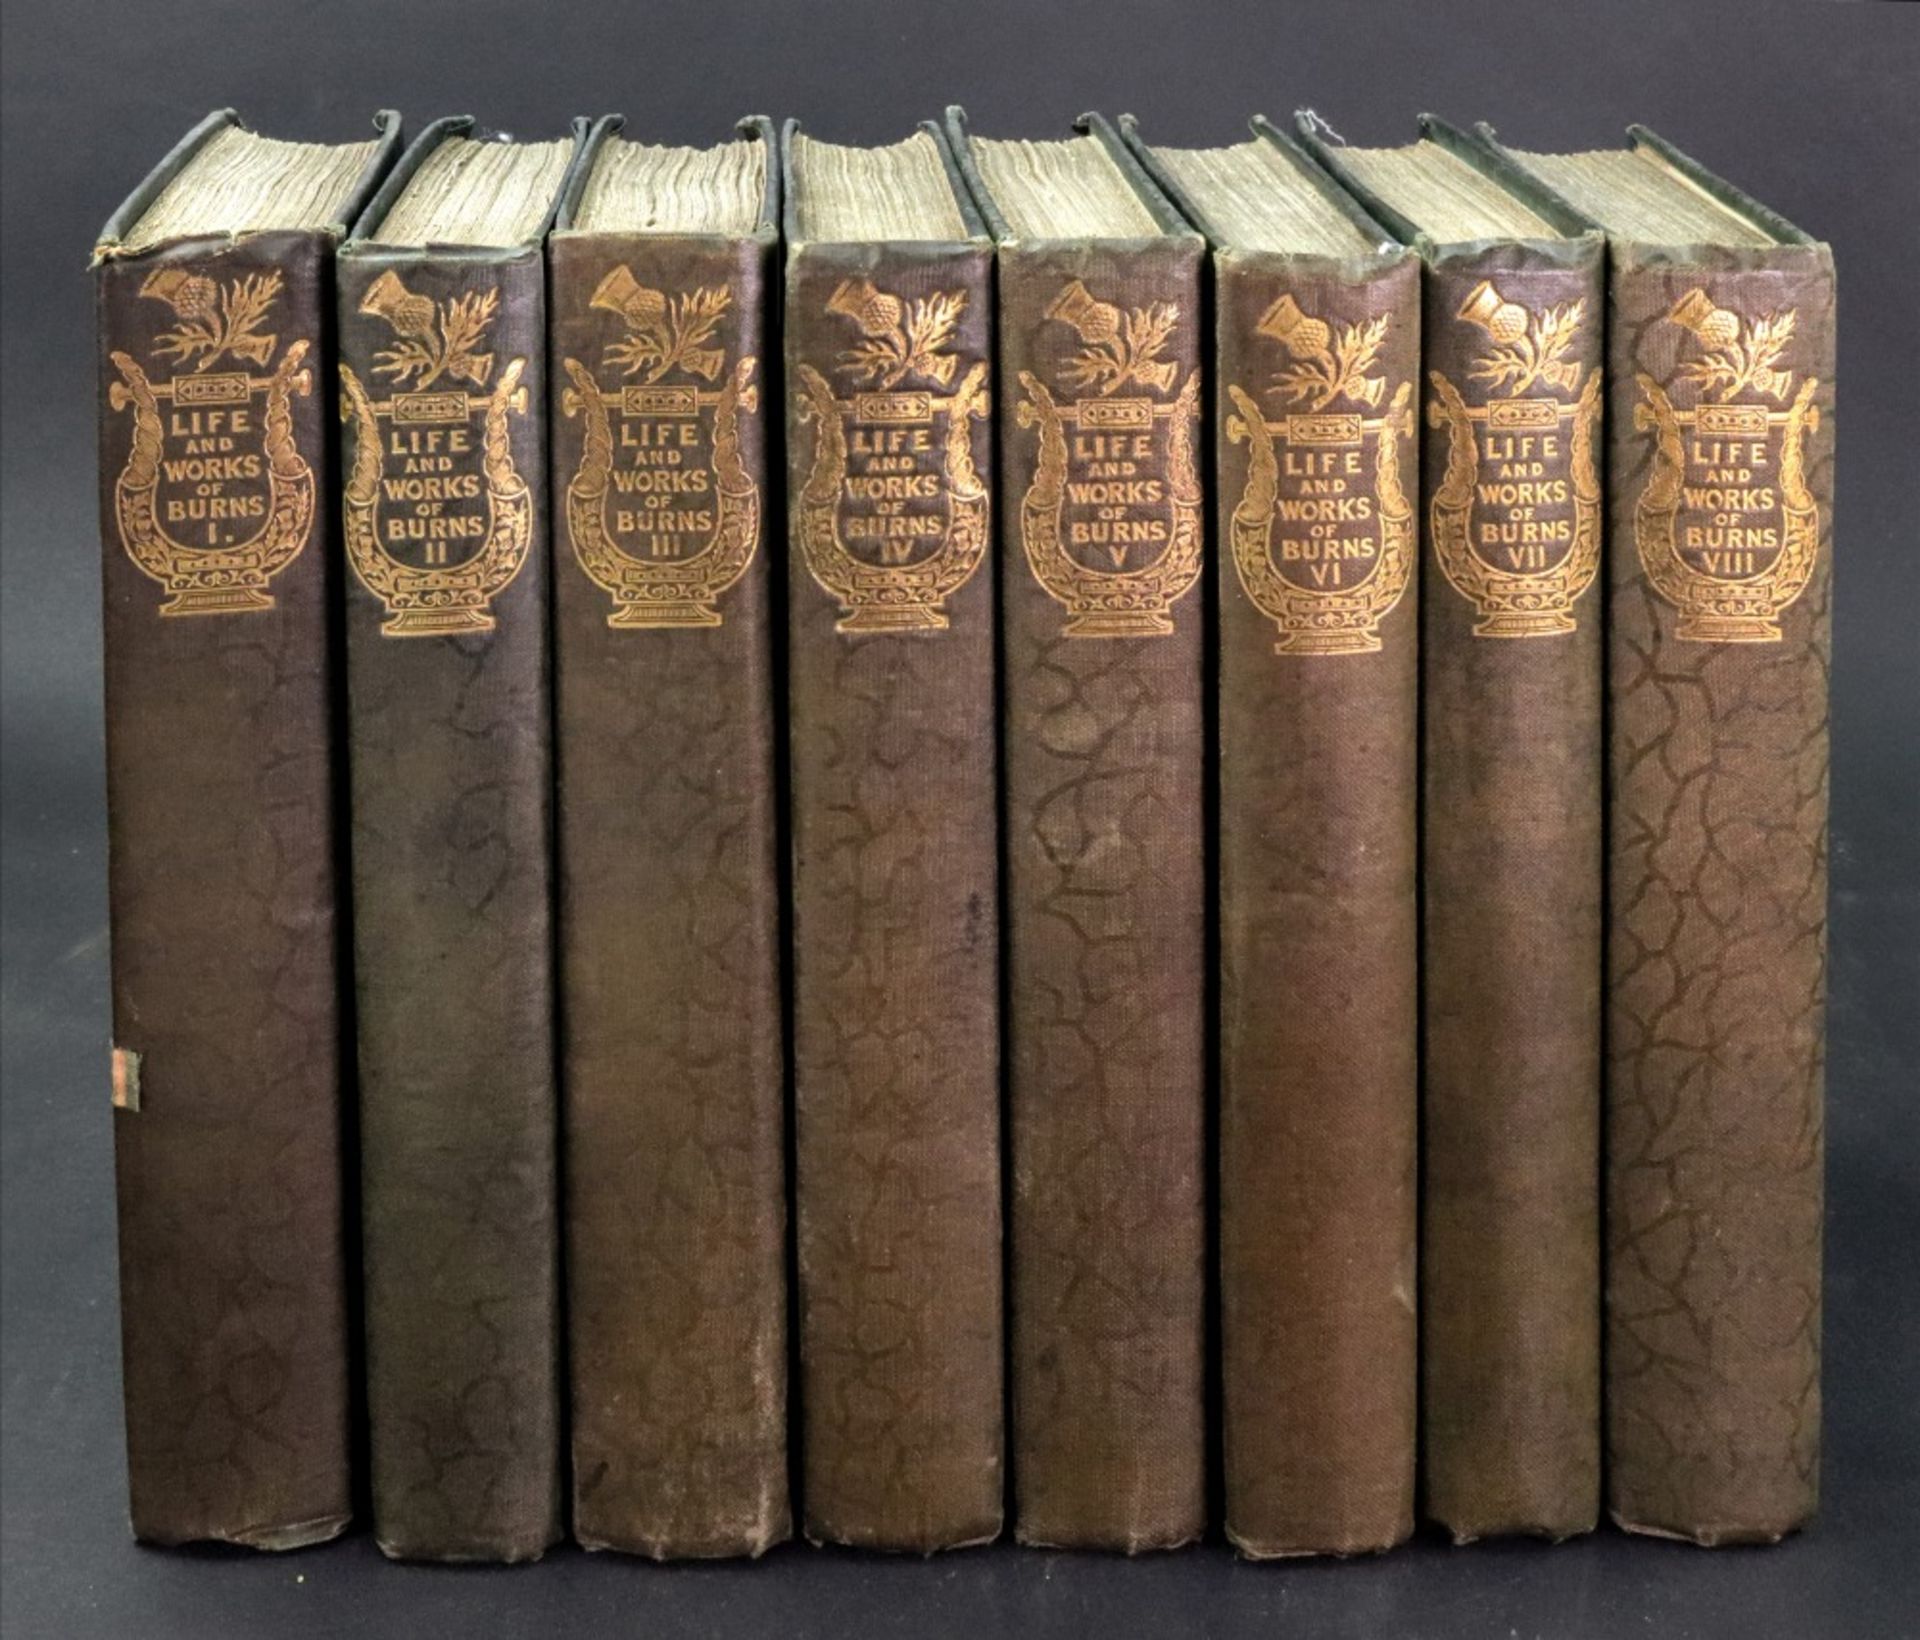 The Life and Works of Robert Burns, 8 volumes, James Cochrane and Co, 1834, gilt green cloth,